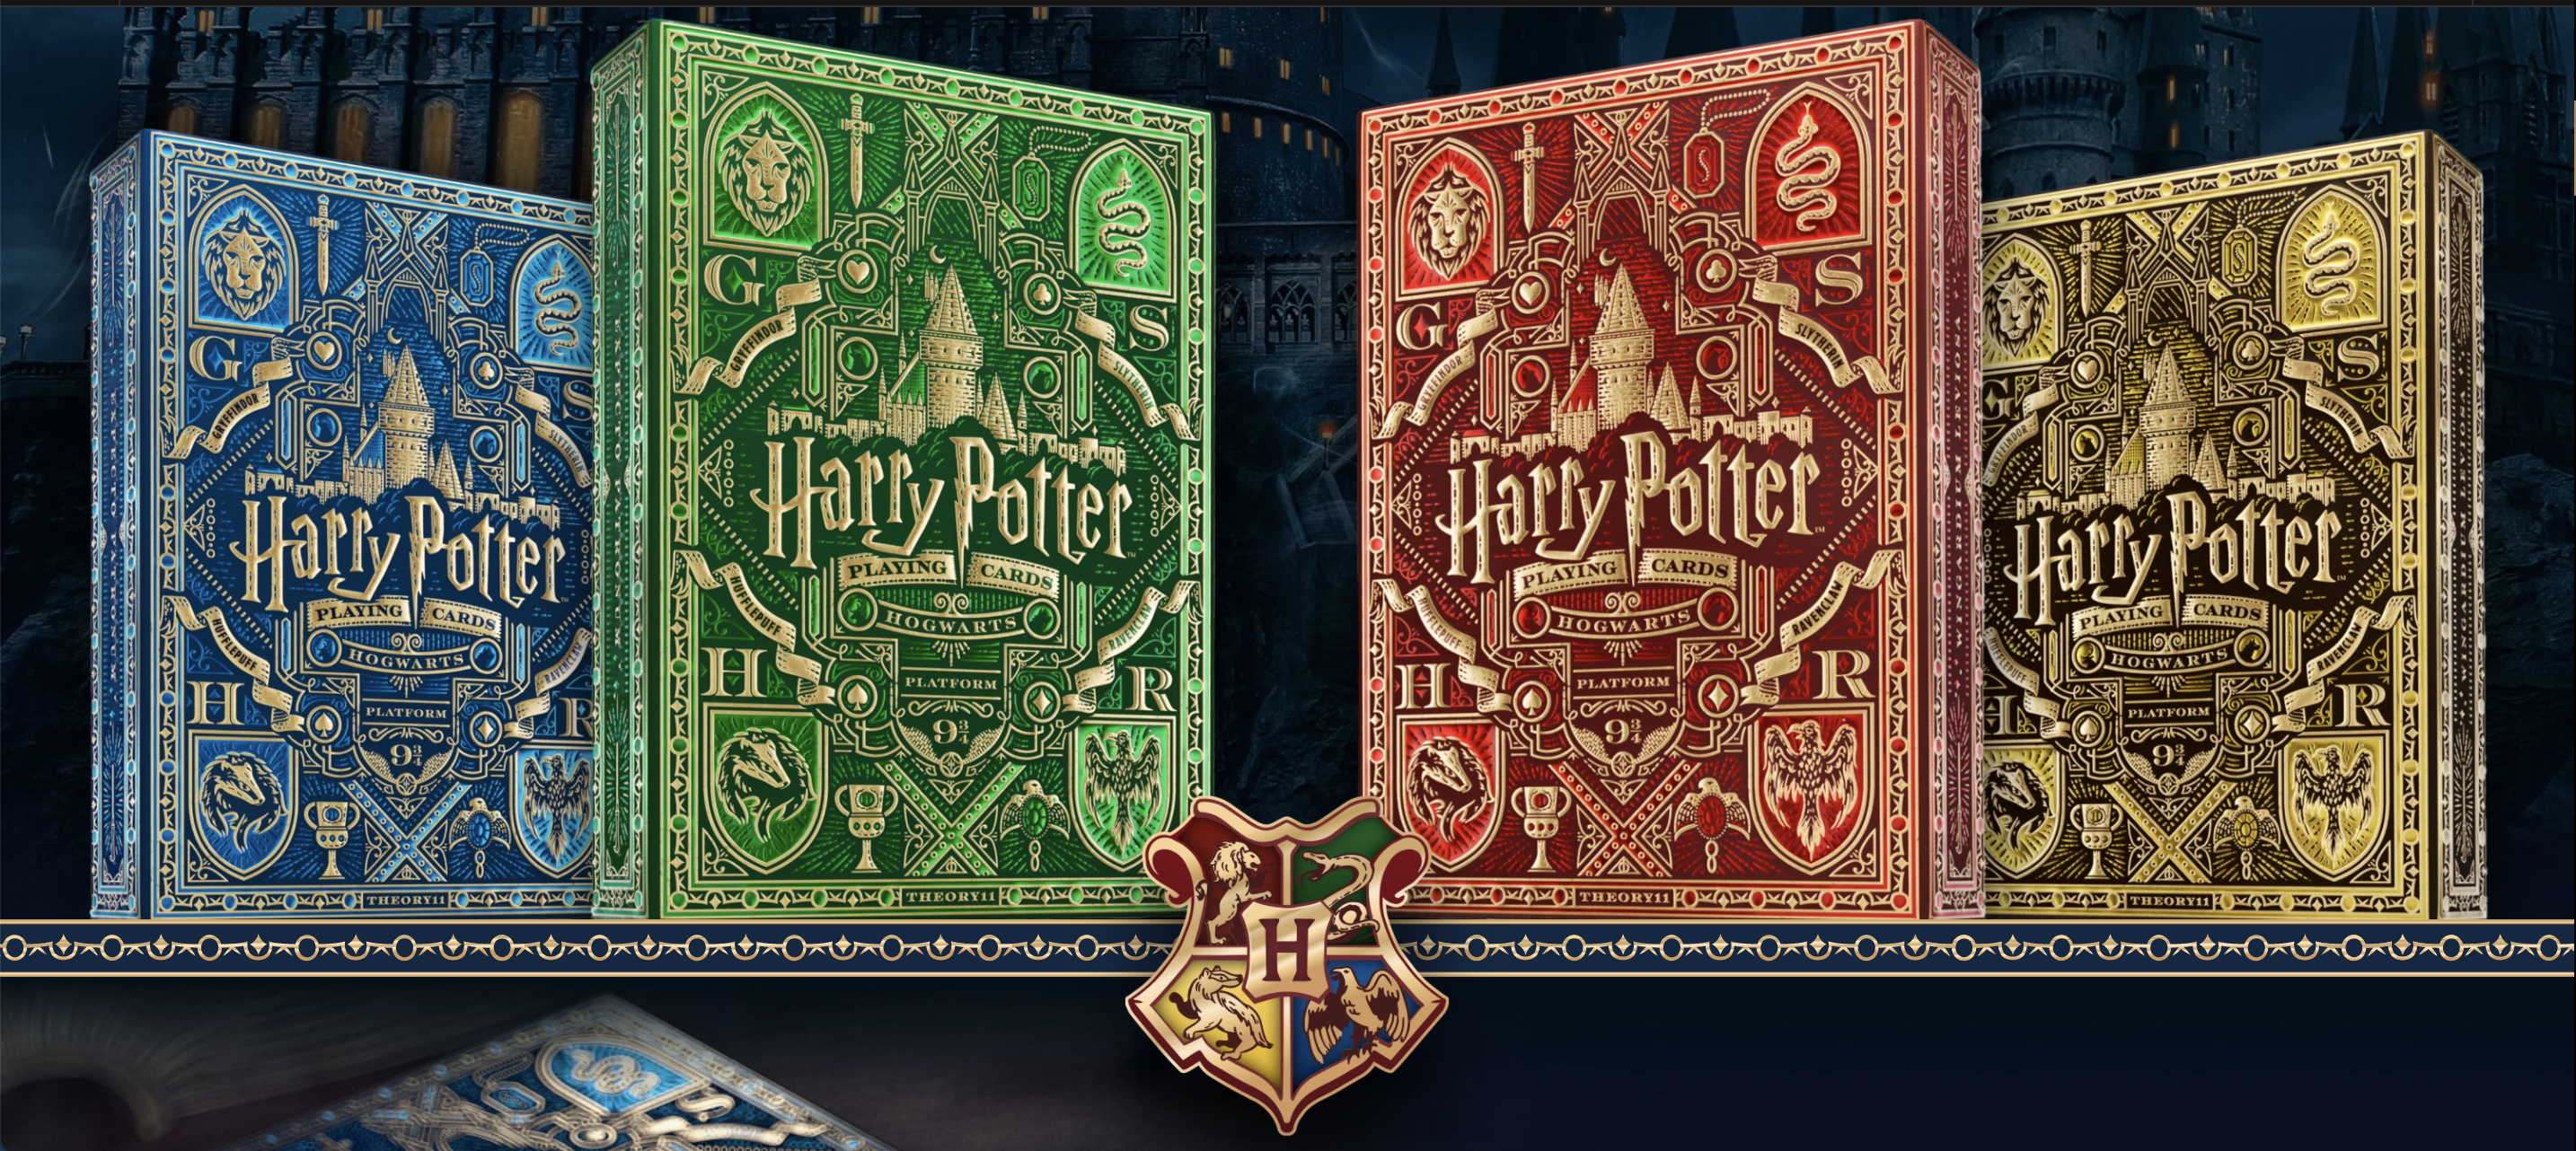 Perfect　Potter　Wizard　CNET　Gifts　Aspiring　for　Any　Best　Harry